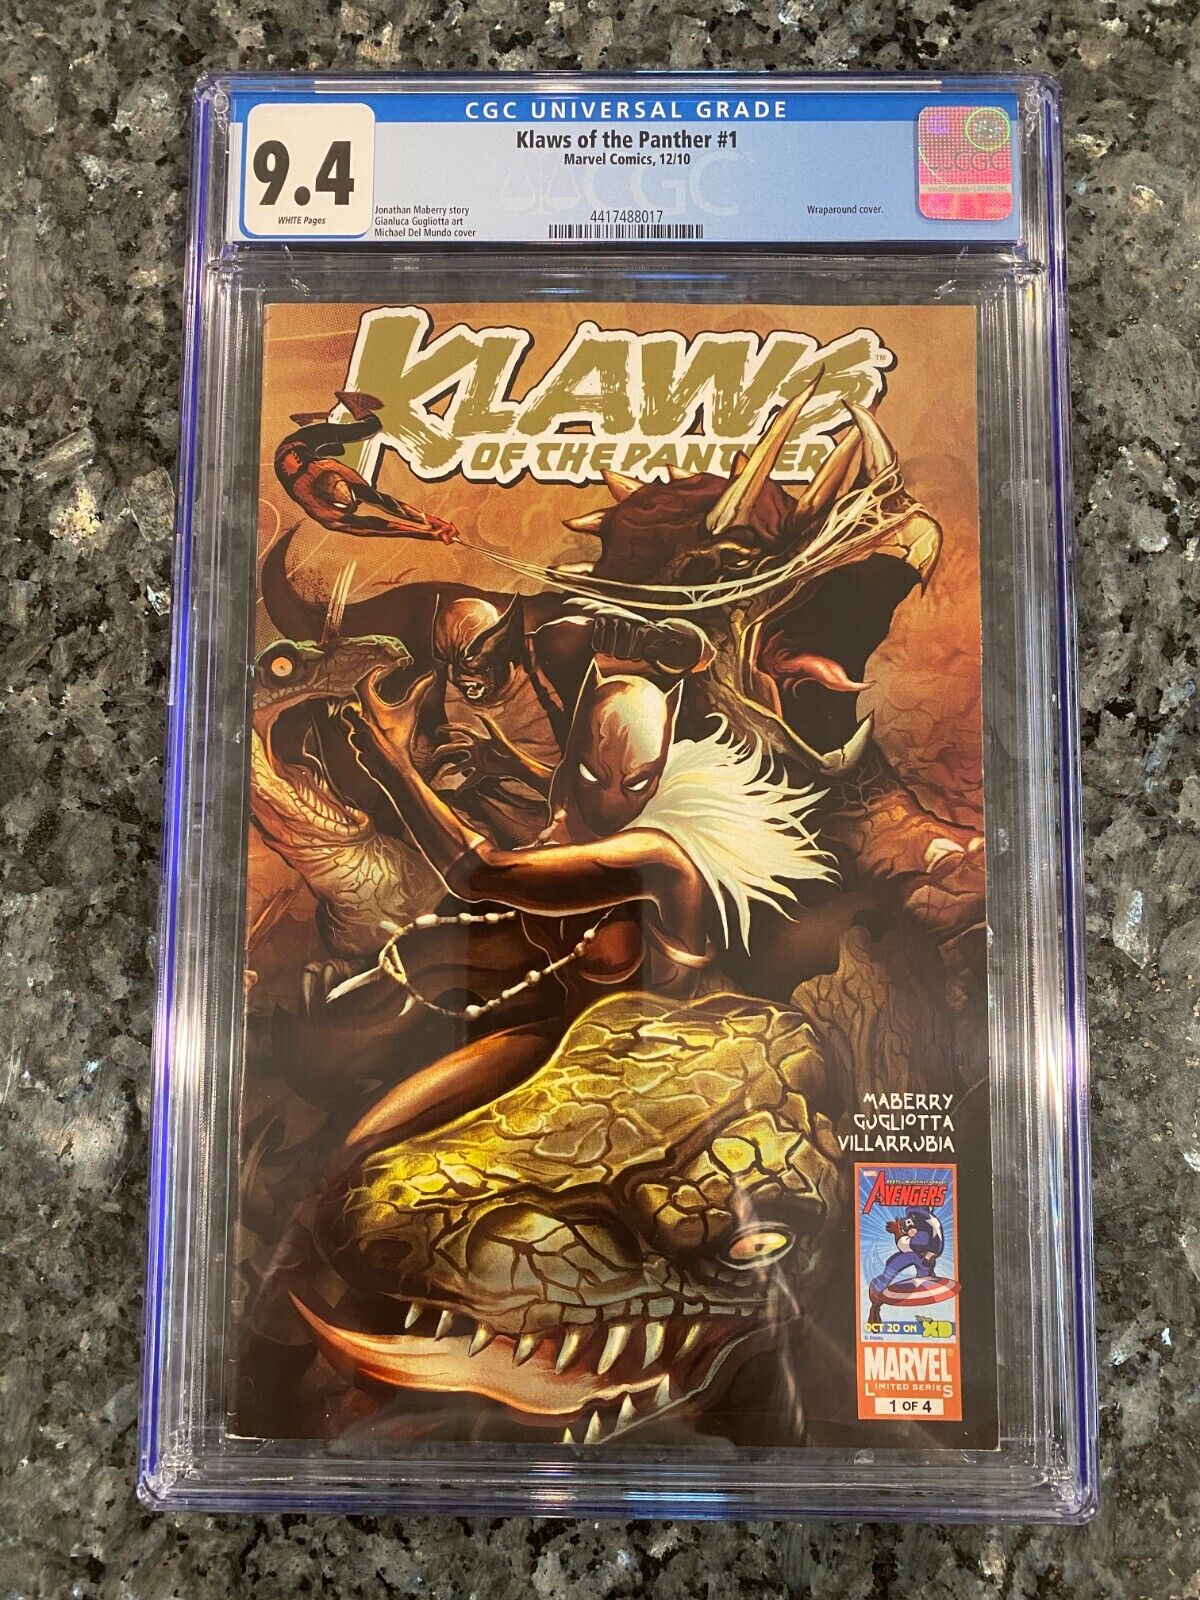 Sleek, Powerful, and Iconic: Klaws of the Panther #1 - CGC 9.4 White Pages